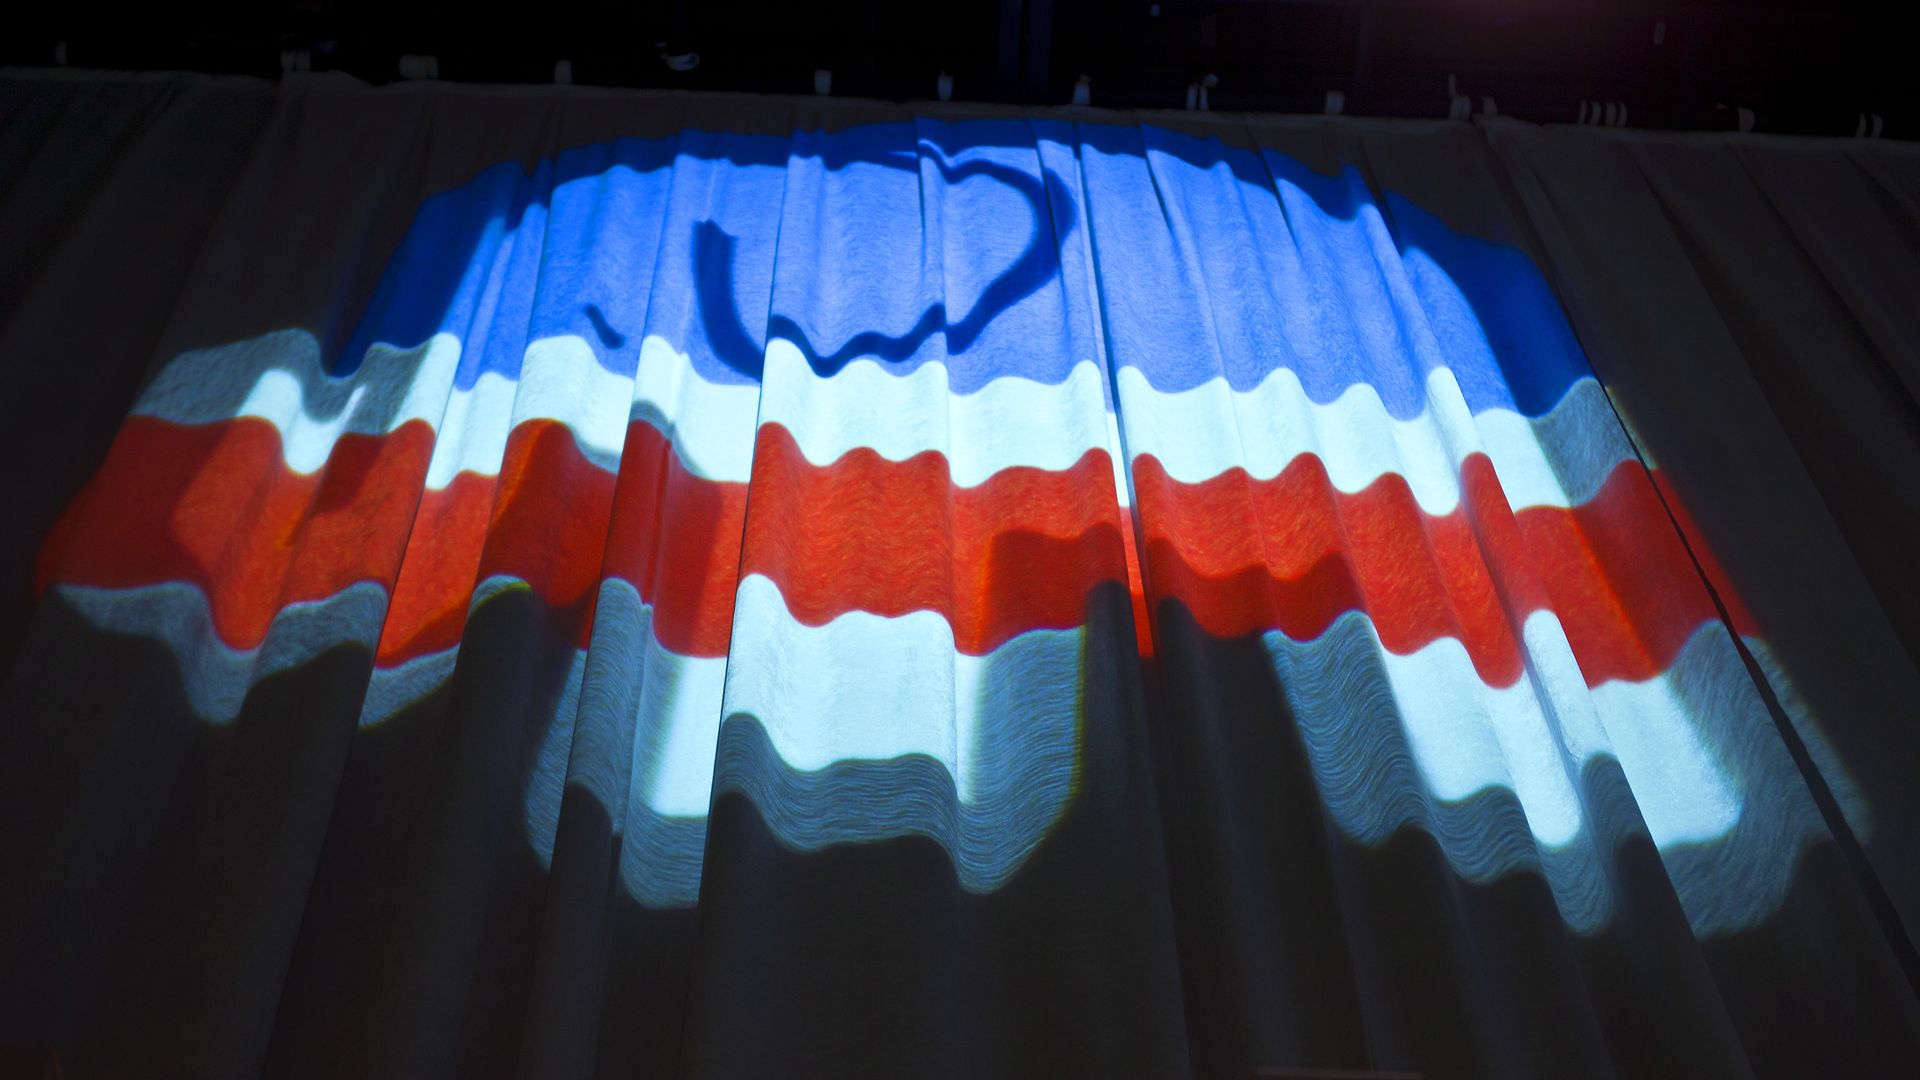 Lights reflected on a curtain reveal the shape of the GOP elephant 